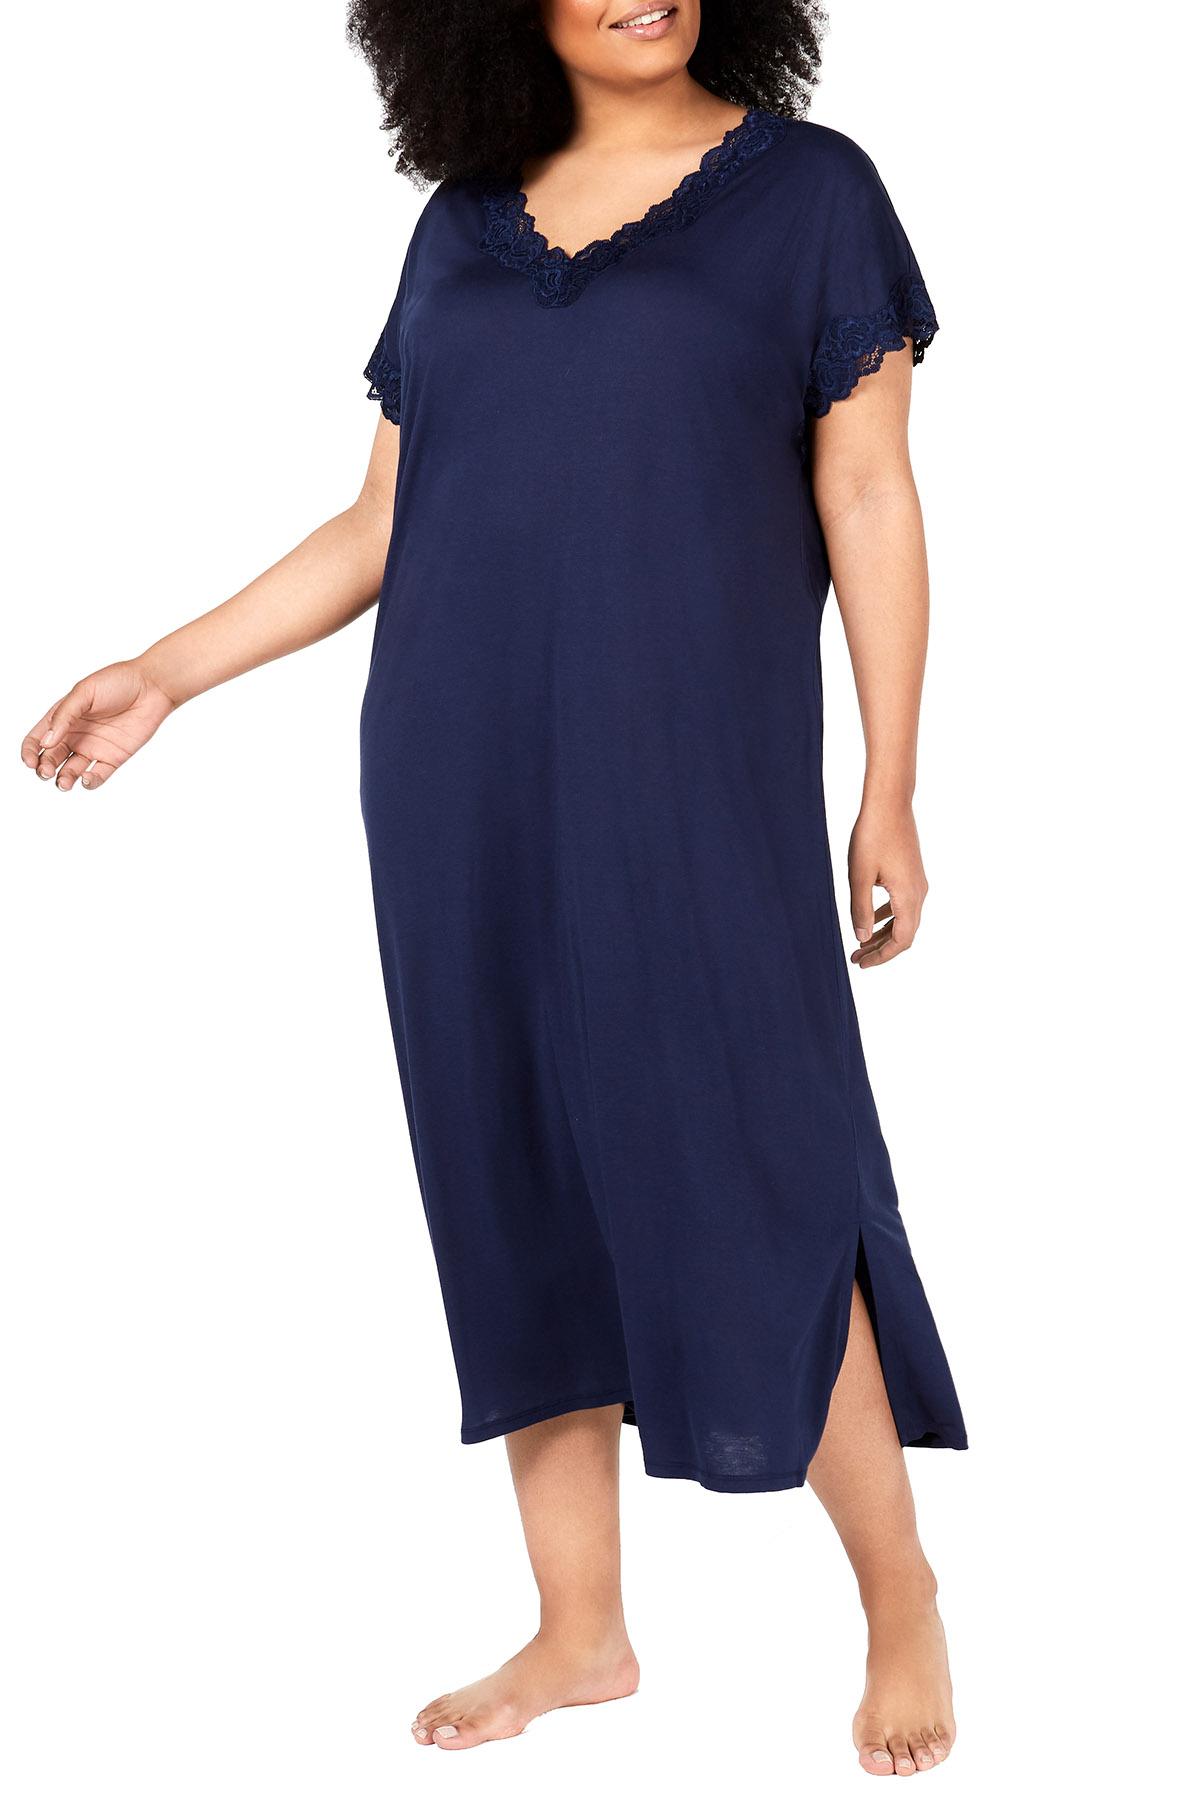 Charter Club Intimates PLUS Ink Blue Lace Trim Soft Knit Modal Nightgown